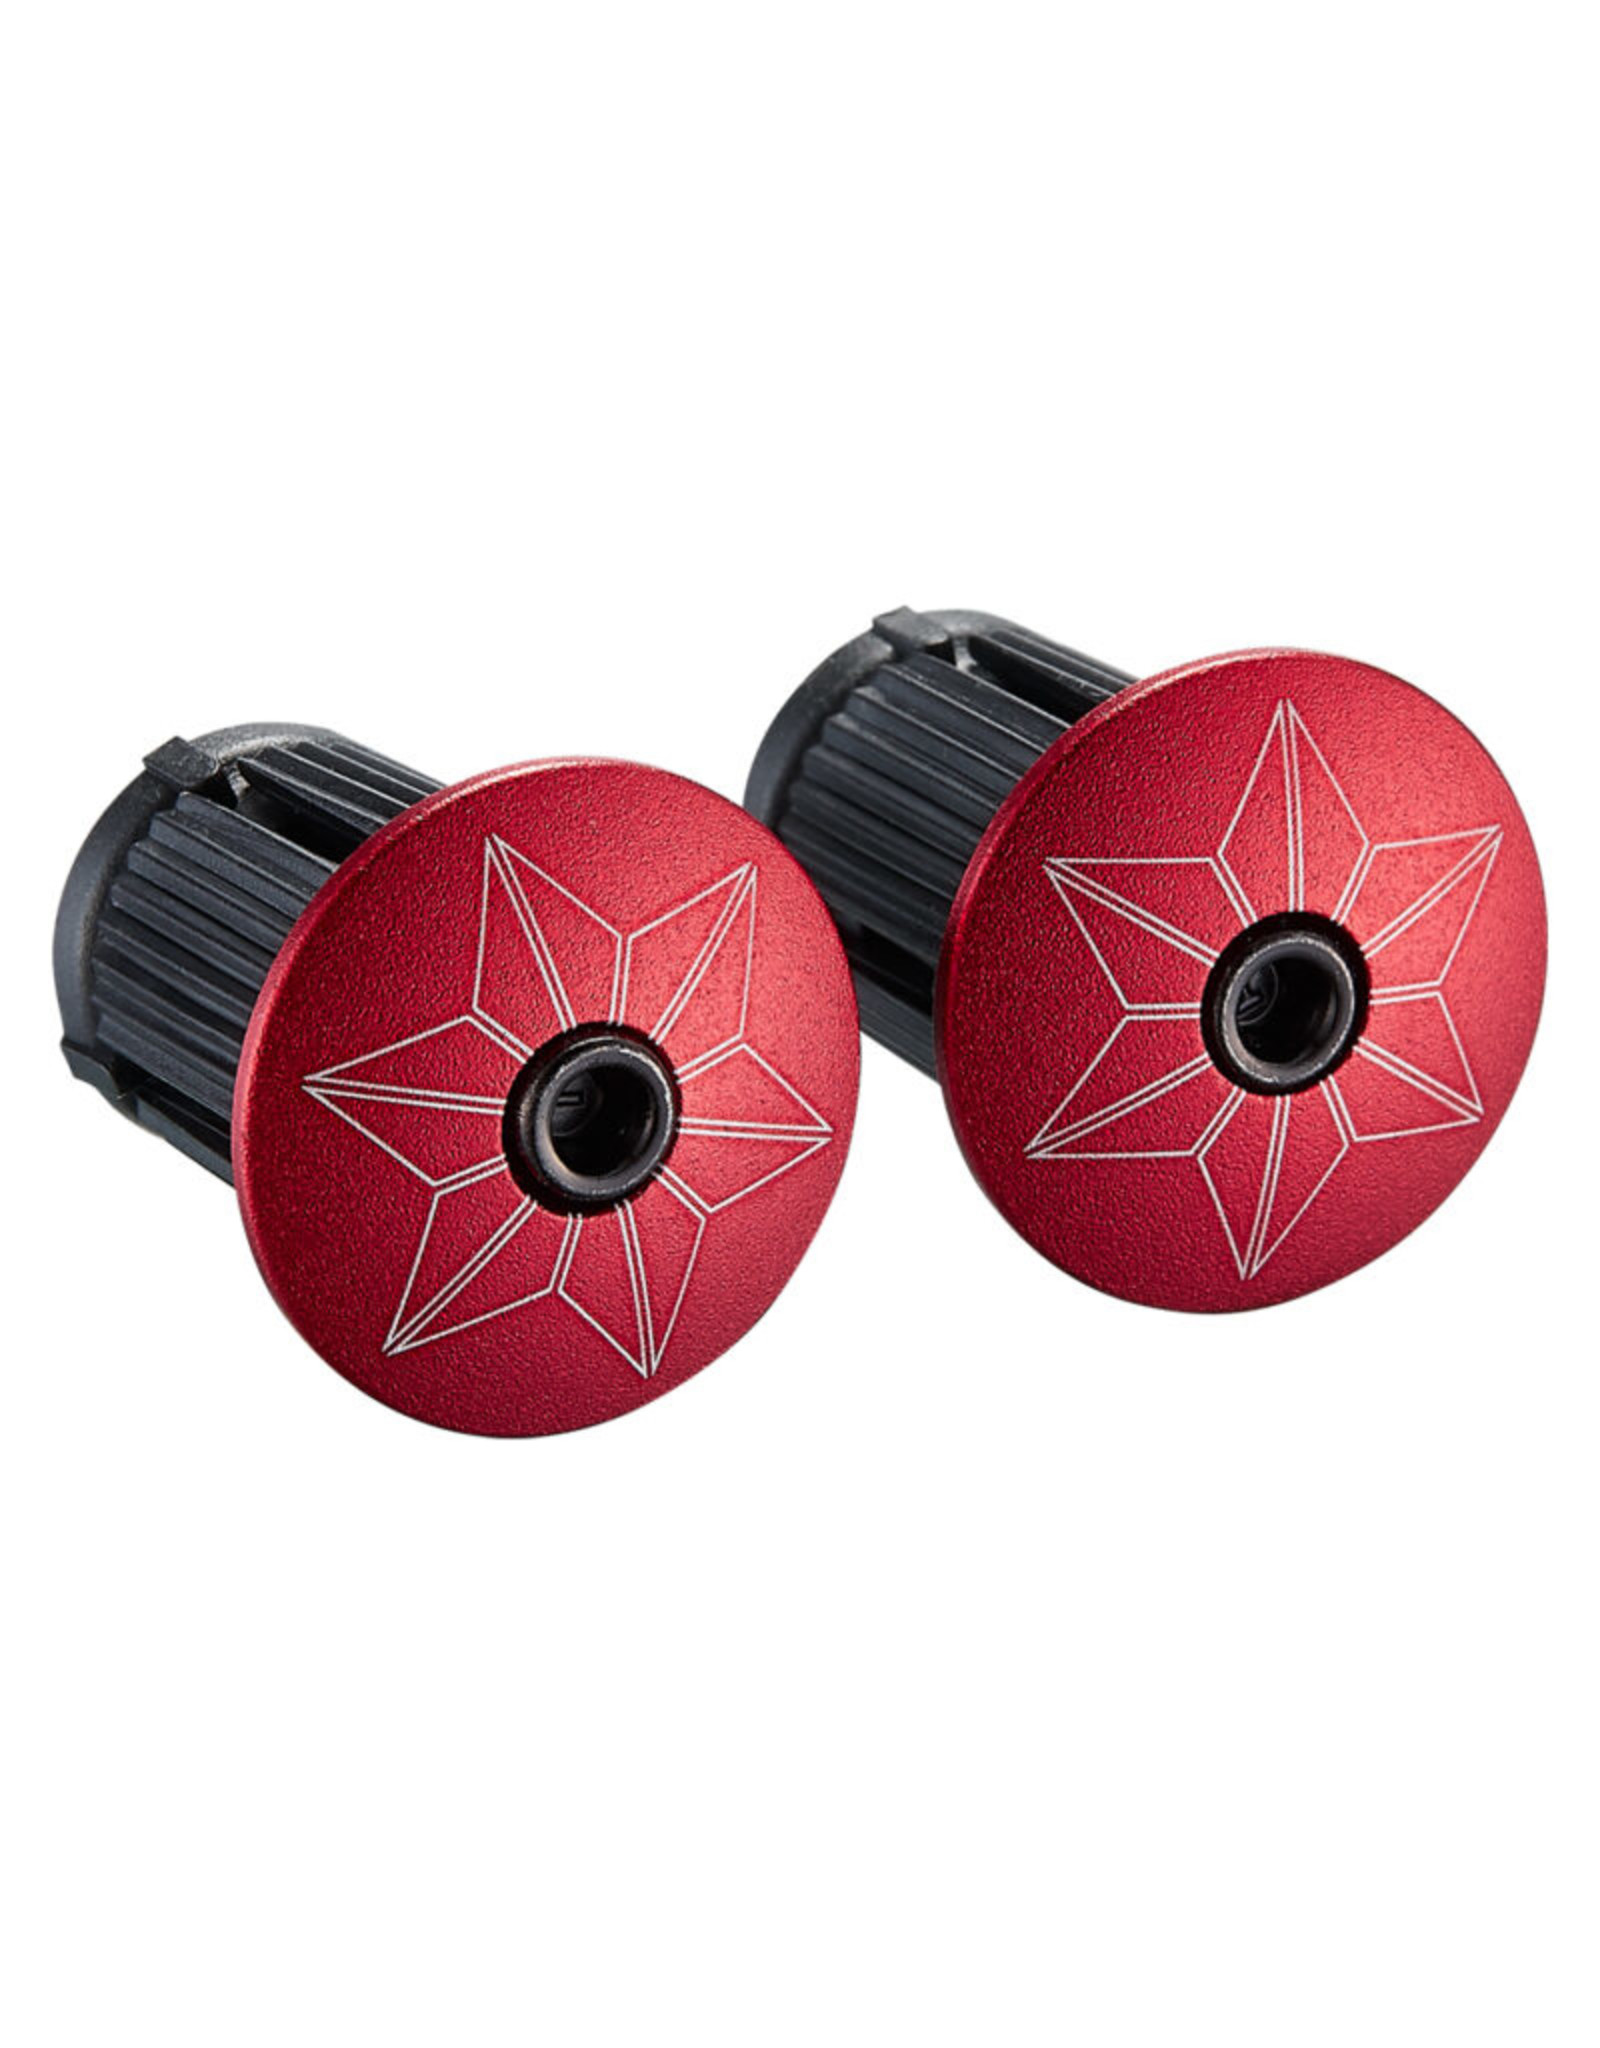 SPECIALIZED Supacaz Super Sticky Kush Tape Star Fade - Red/Ano Red